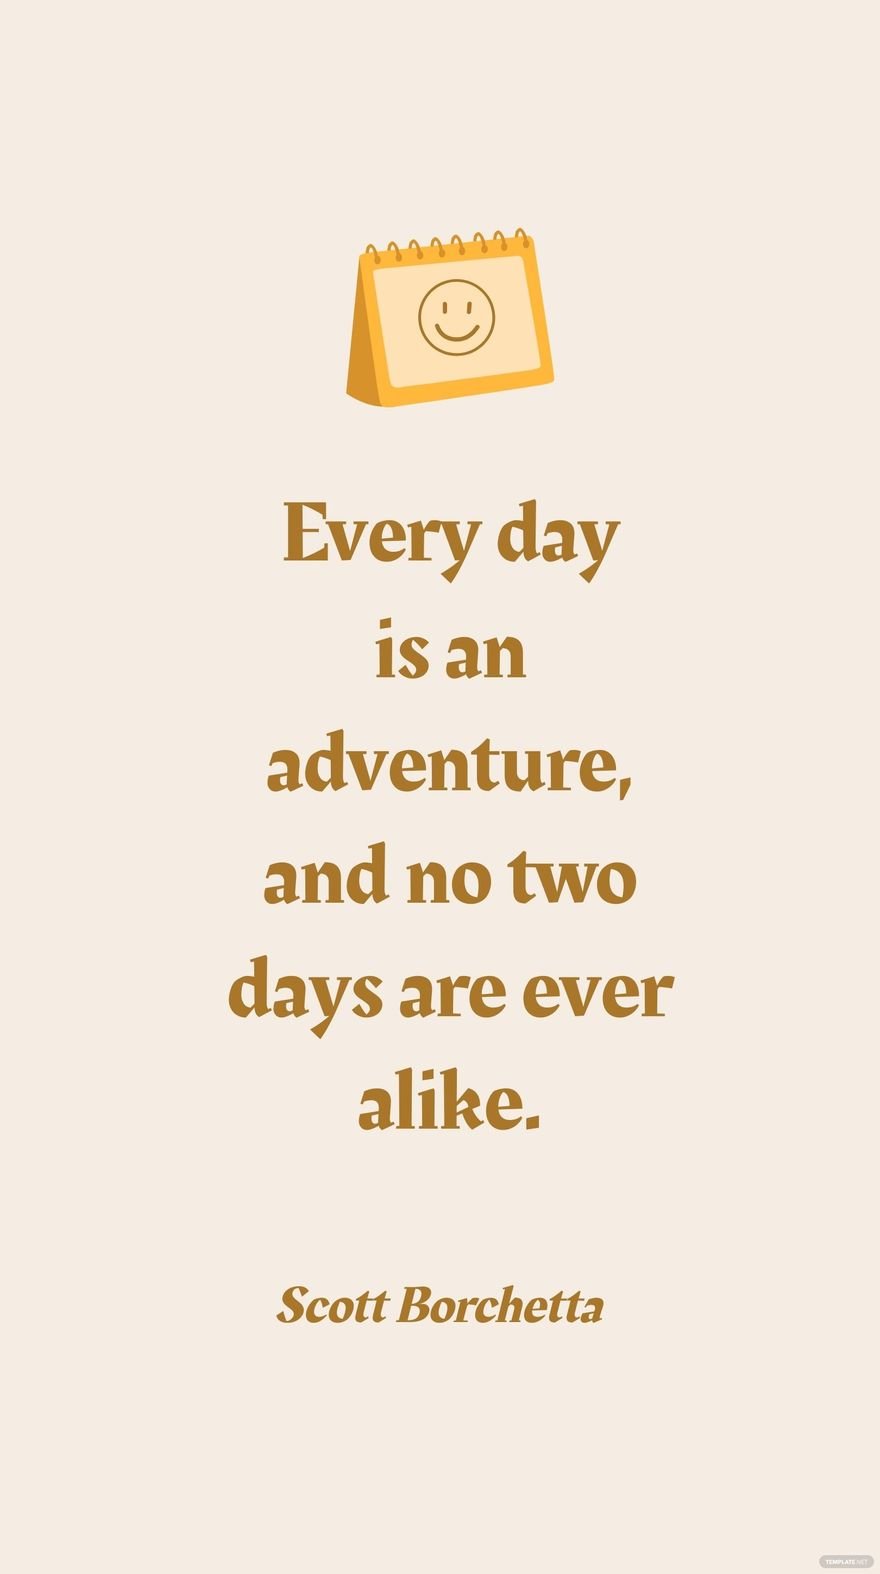 Scott Borchetta - Every day is an adventure, and no two days are ever alike.